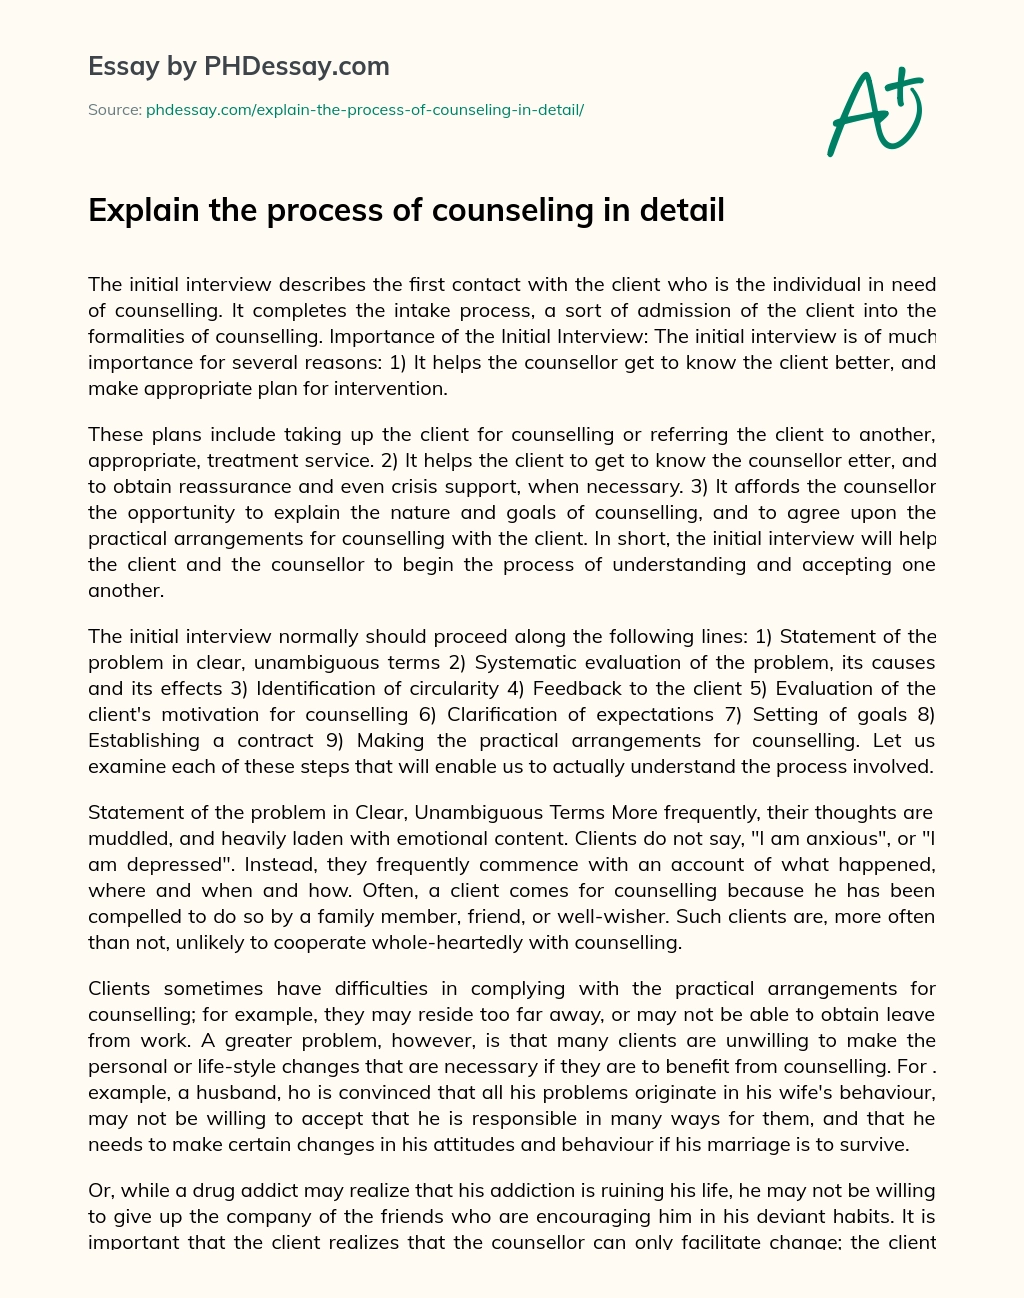 Explain the process of counseling in detail essay